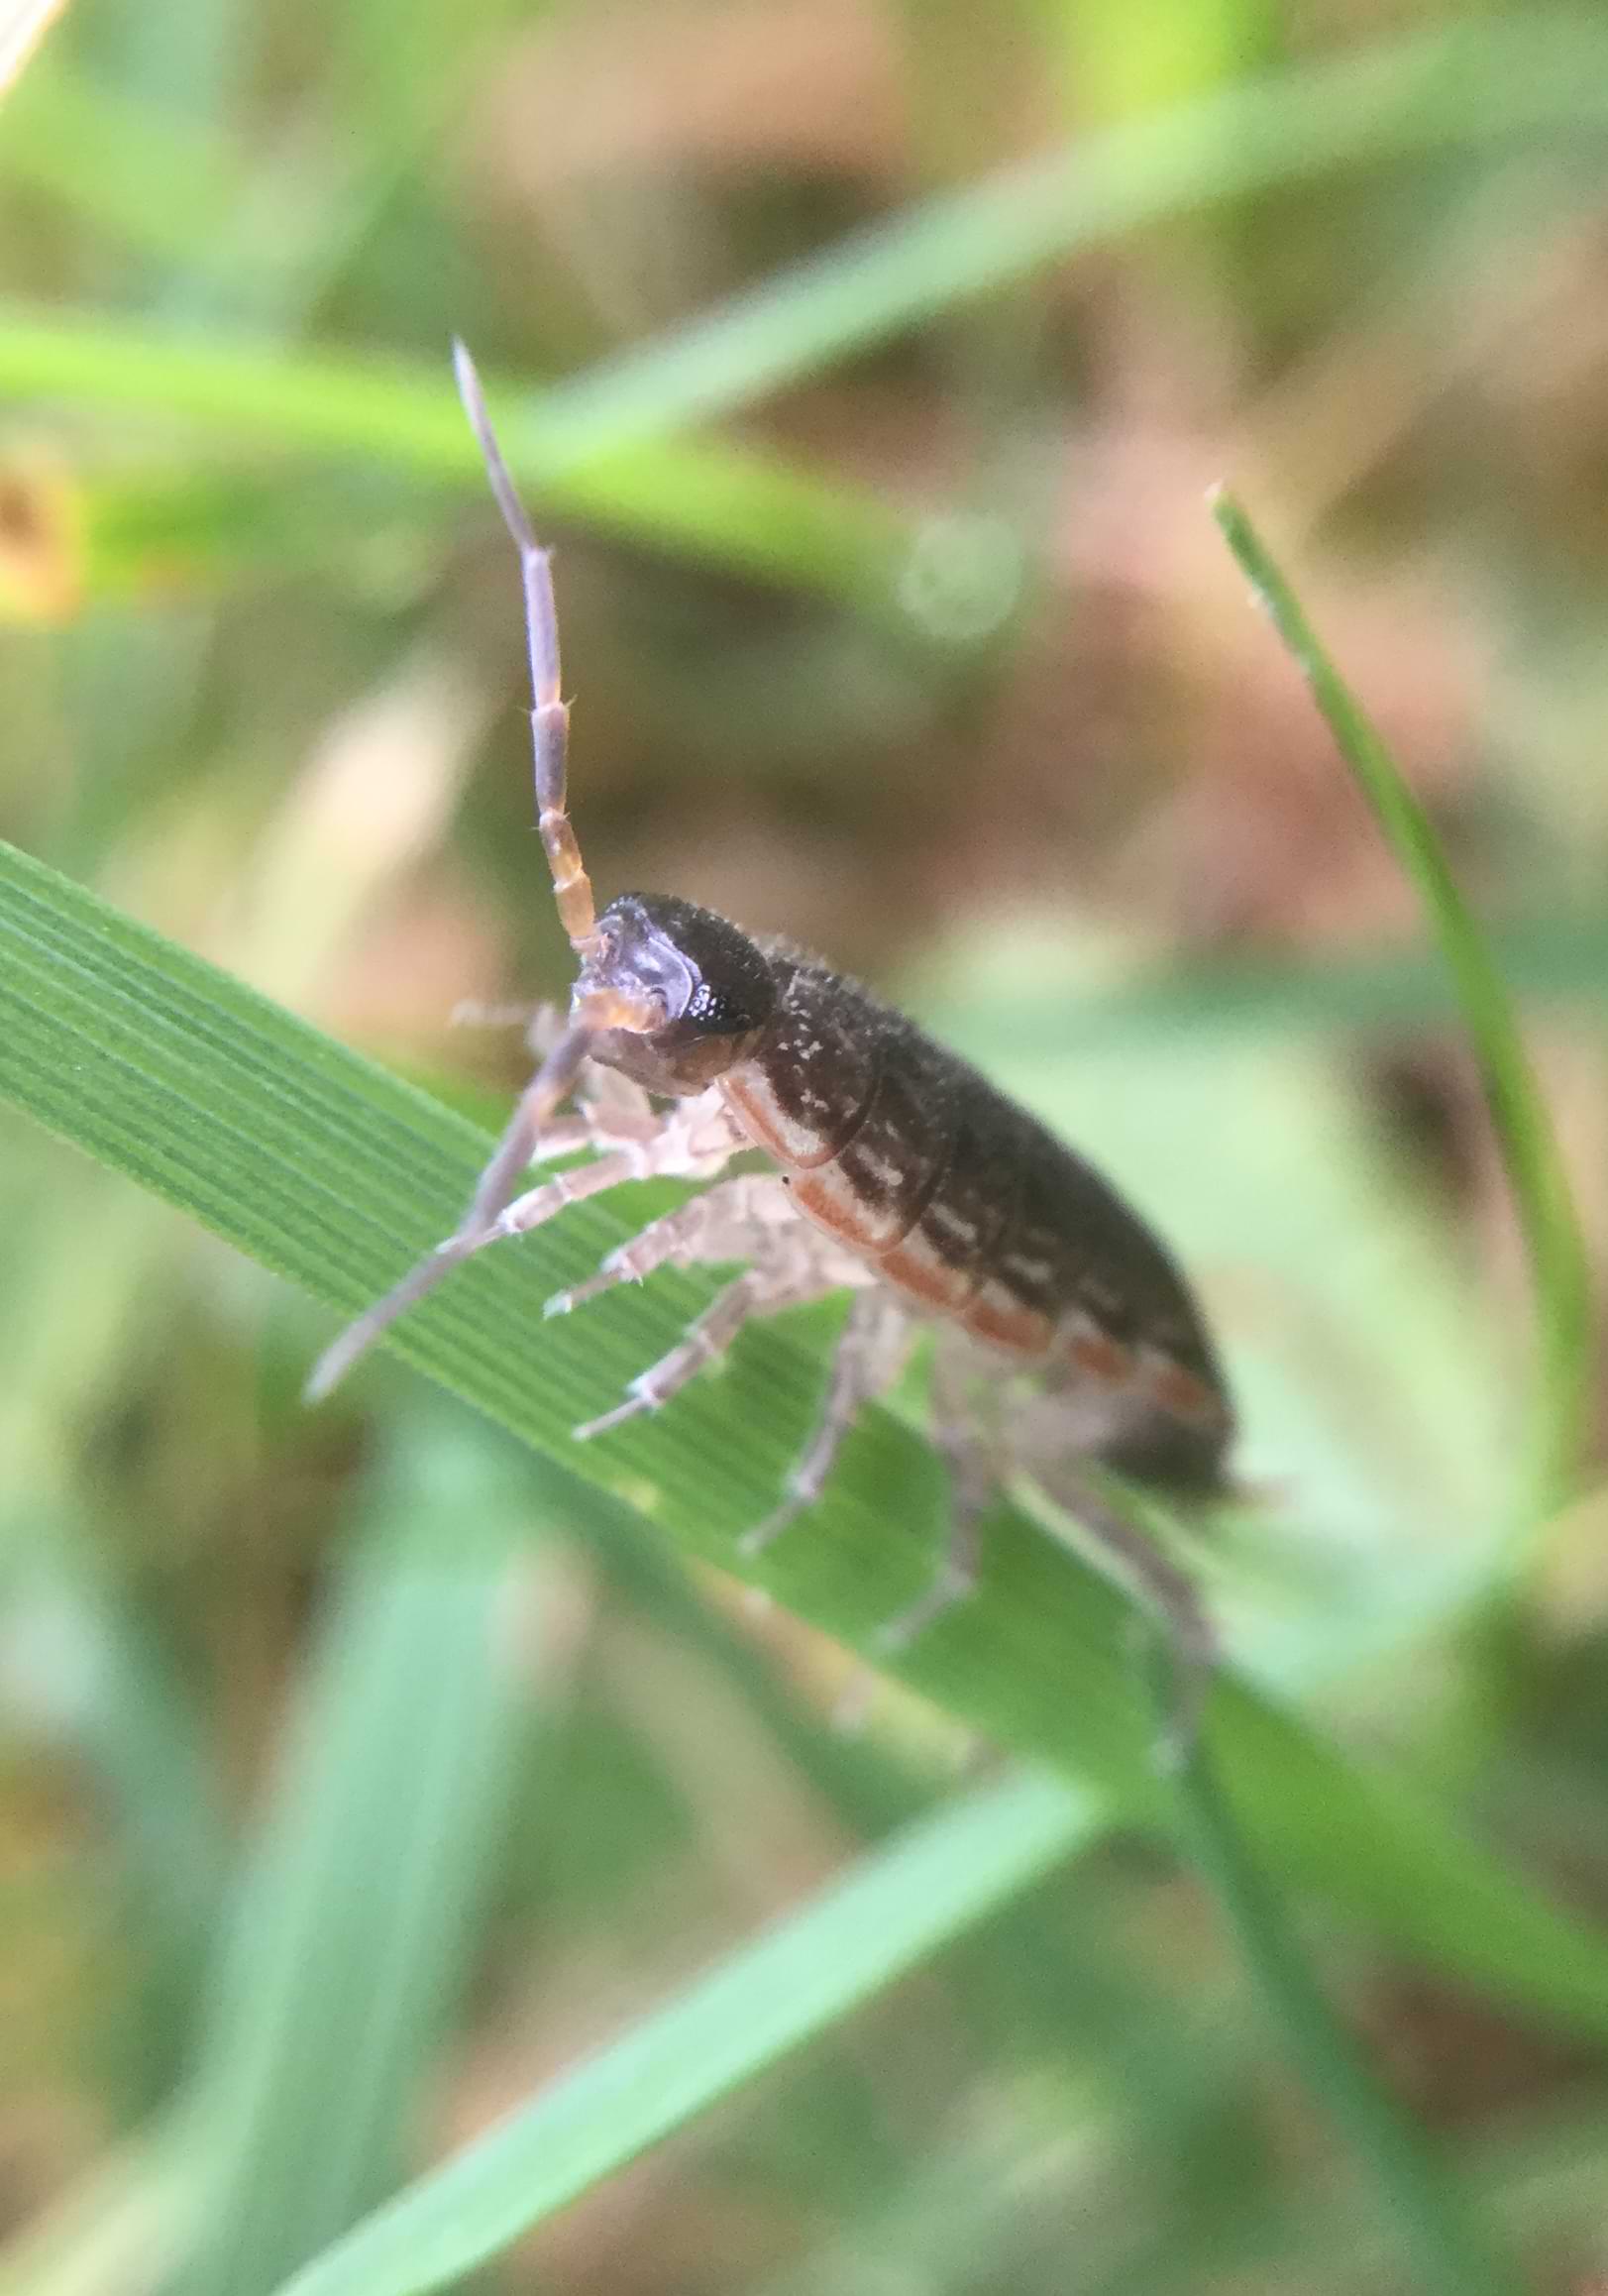 A dark brown isopod climbing a blade of grass, whilst whirling one antennae around in the air.